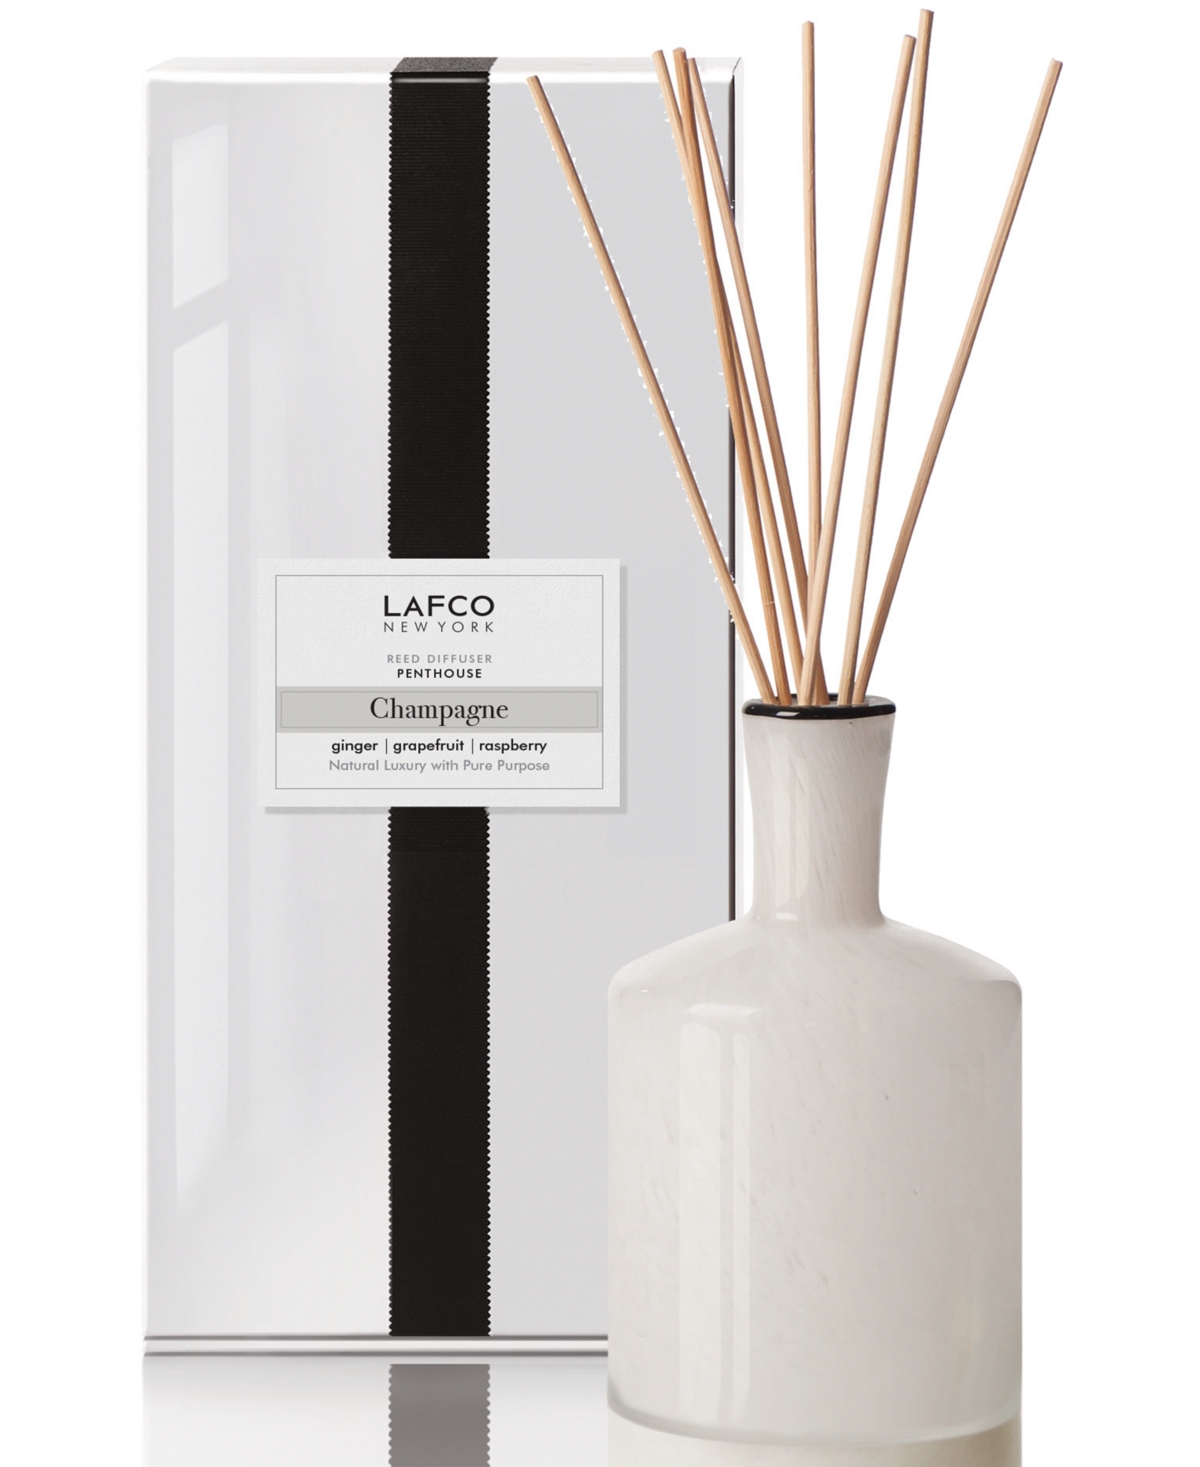 Champagne Penthouse Classic Reed Diffuser, 6-oz. - White